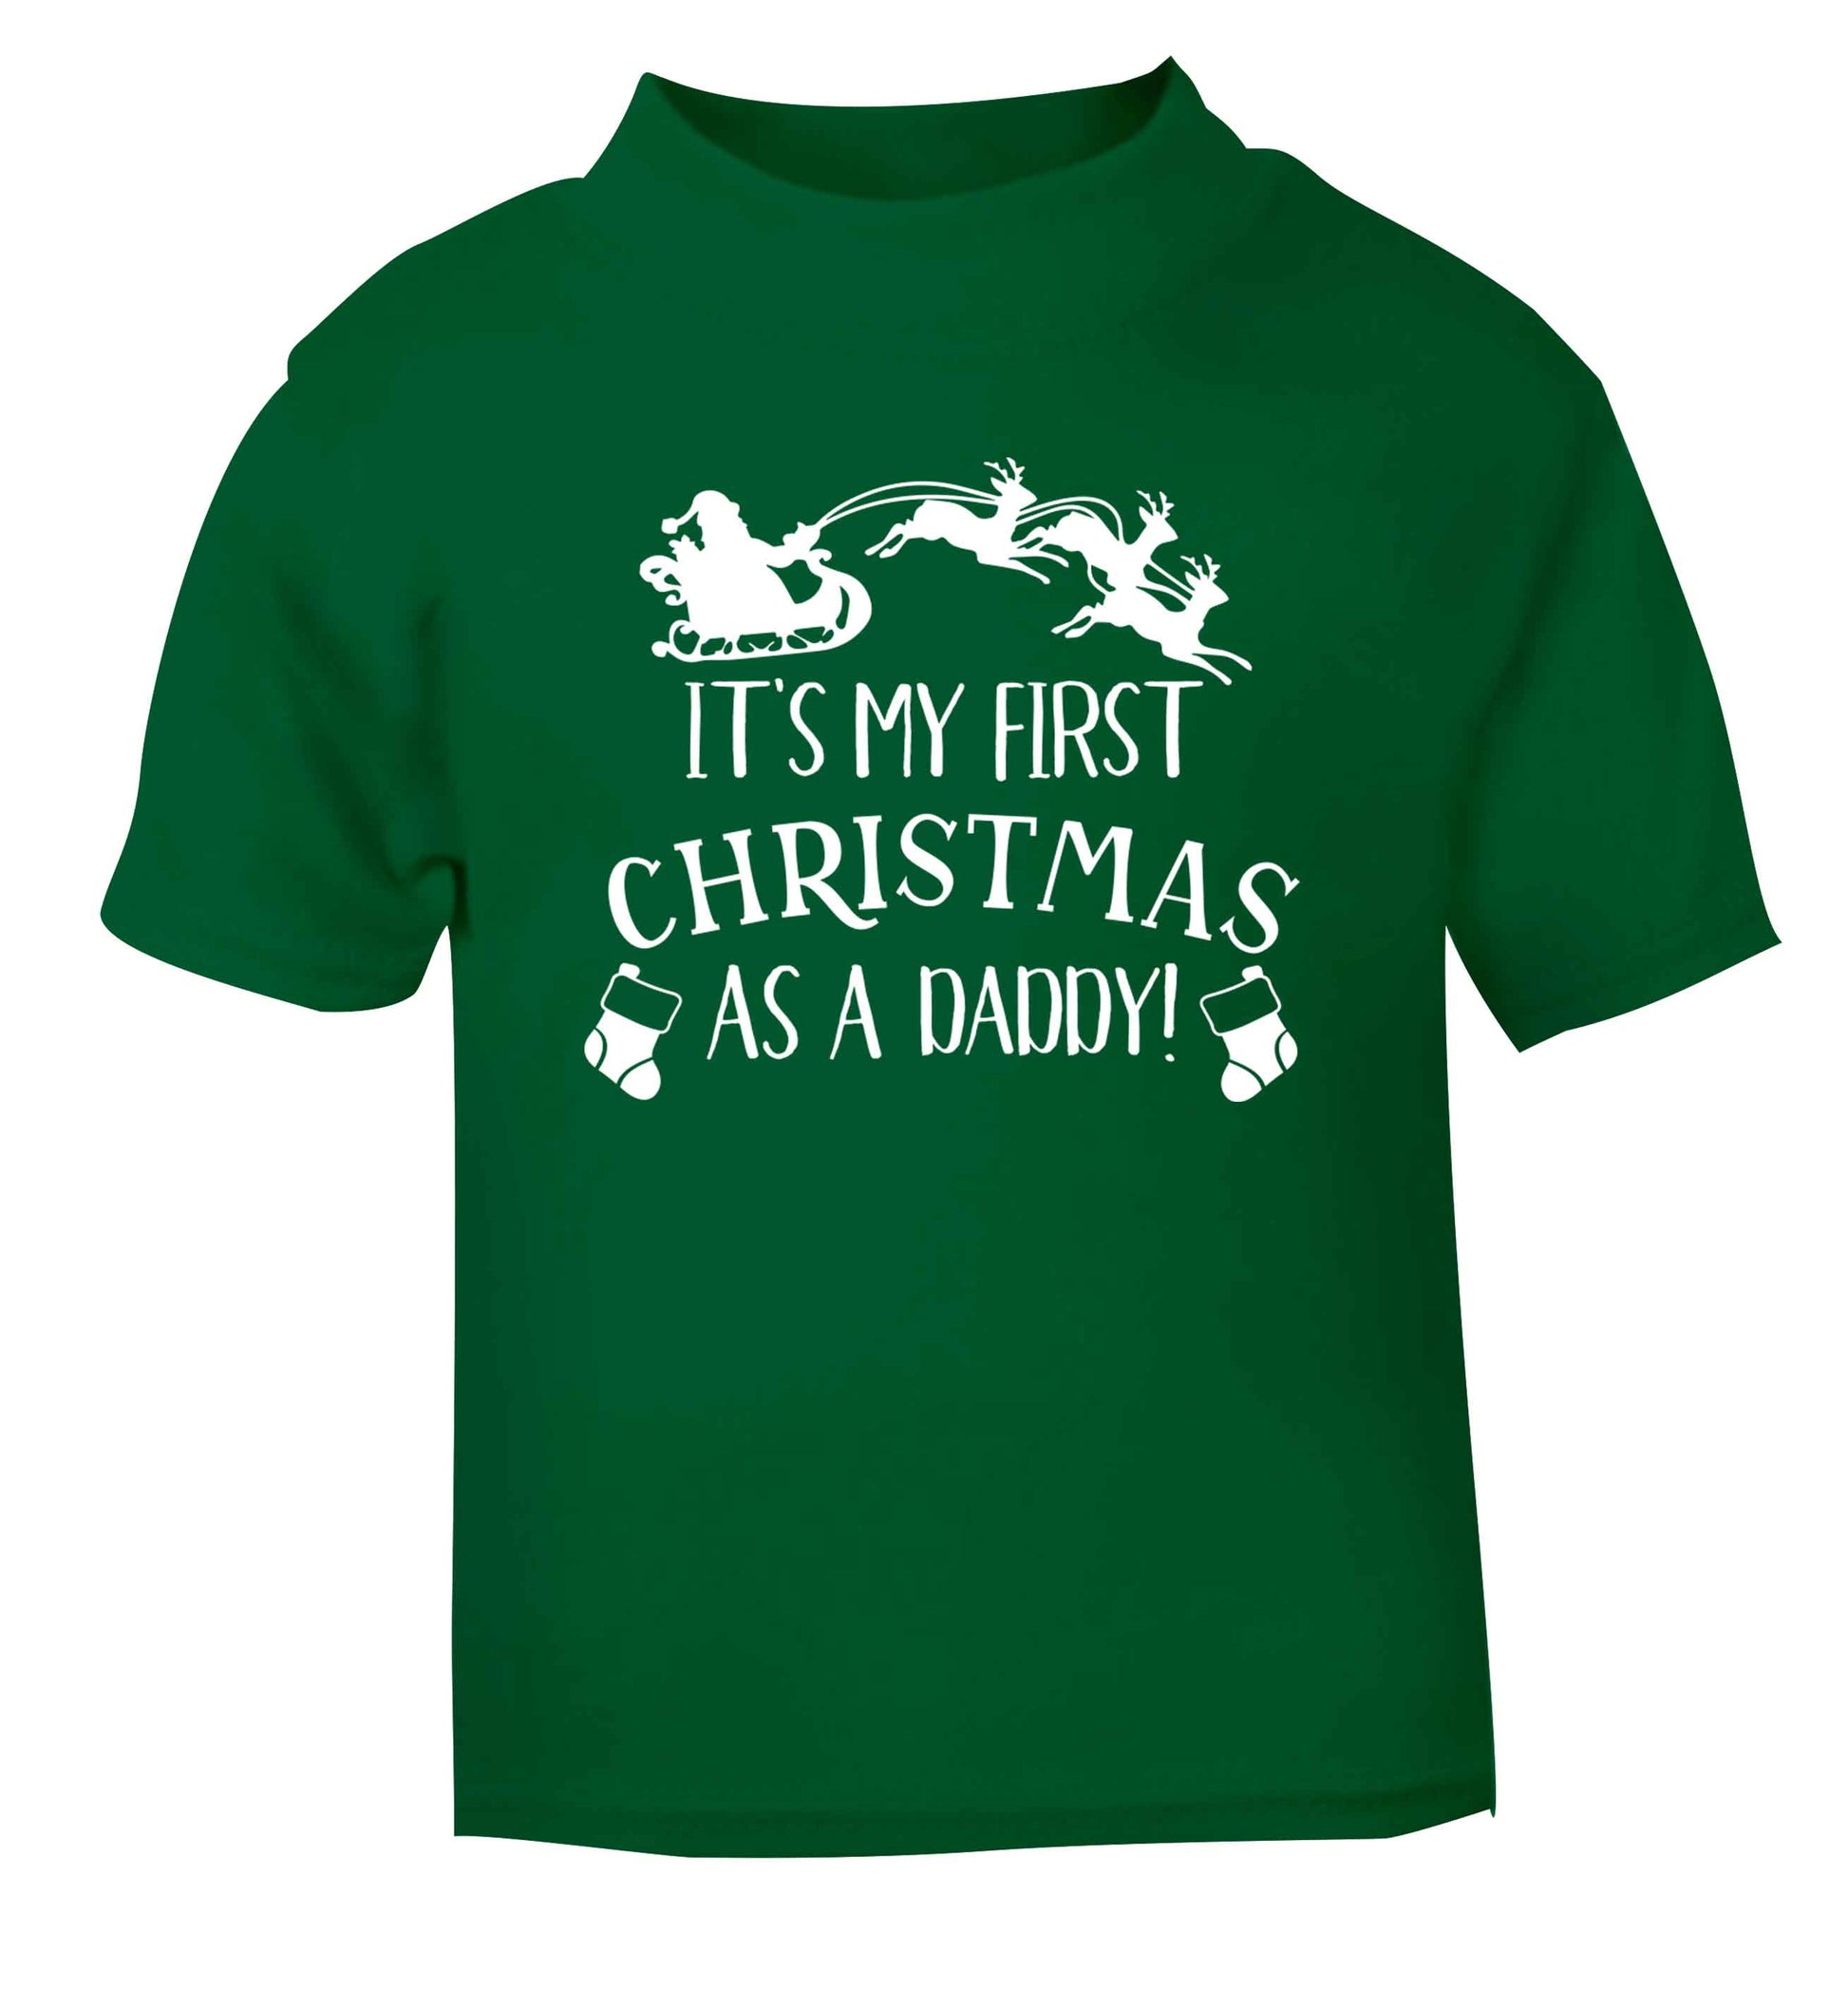 It's my first Christmas as a daddy green Baby Toddler Tshirt 2 Years